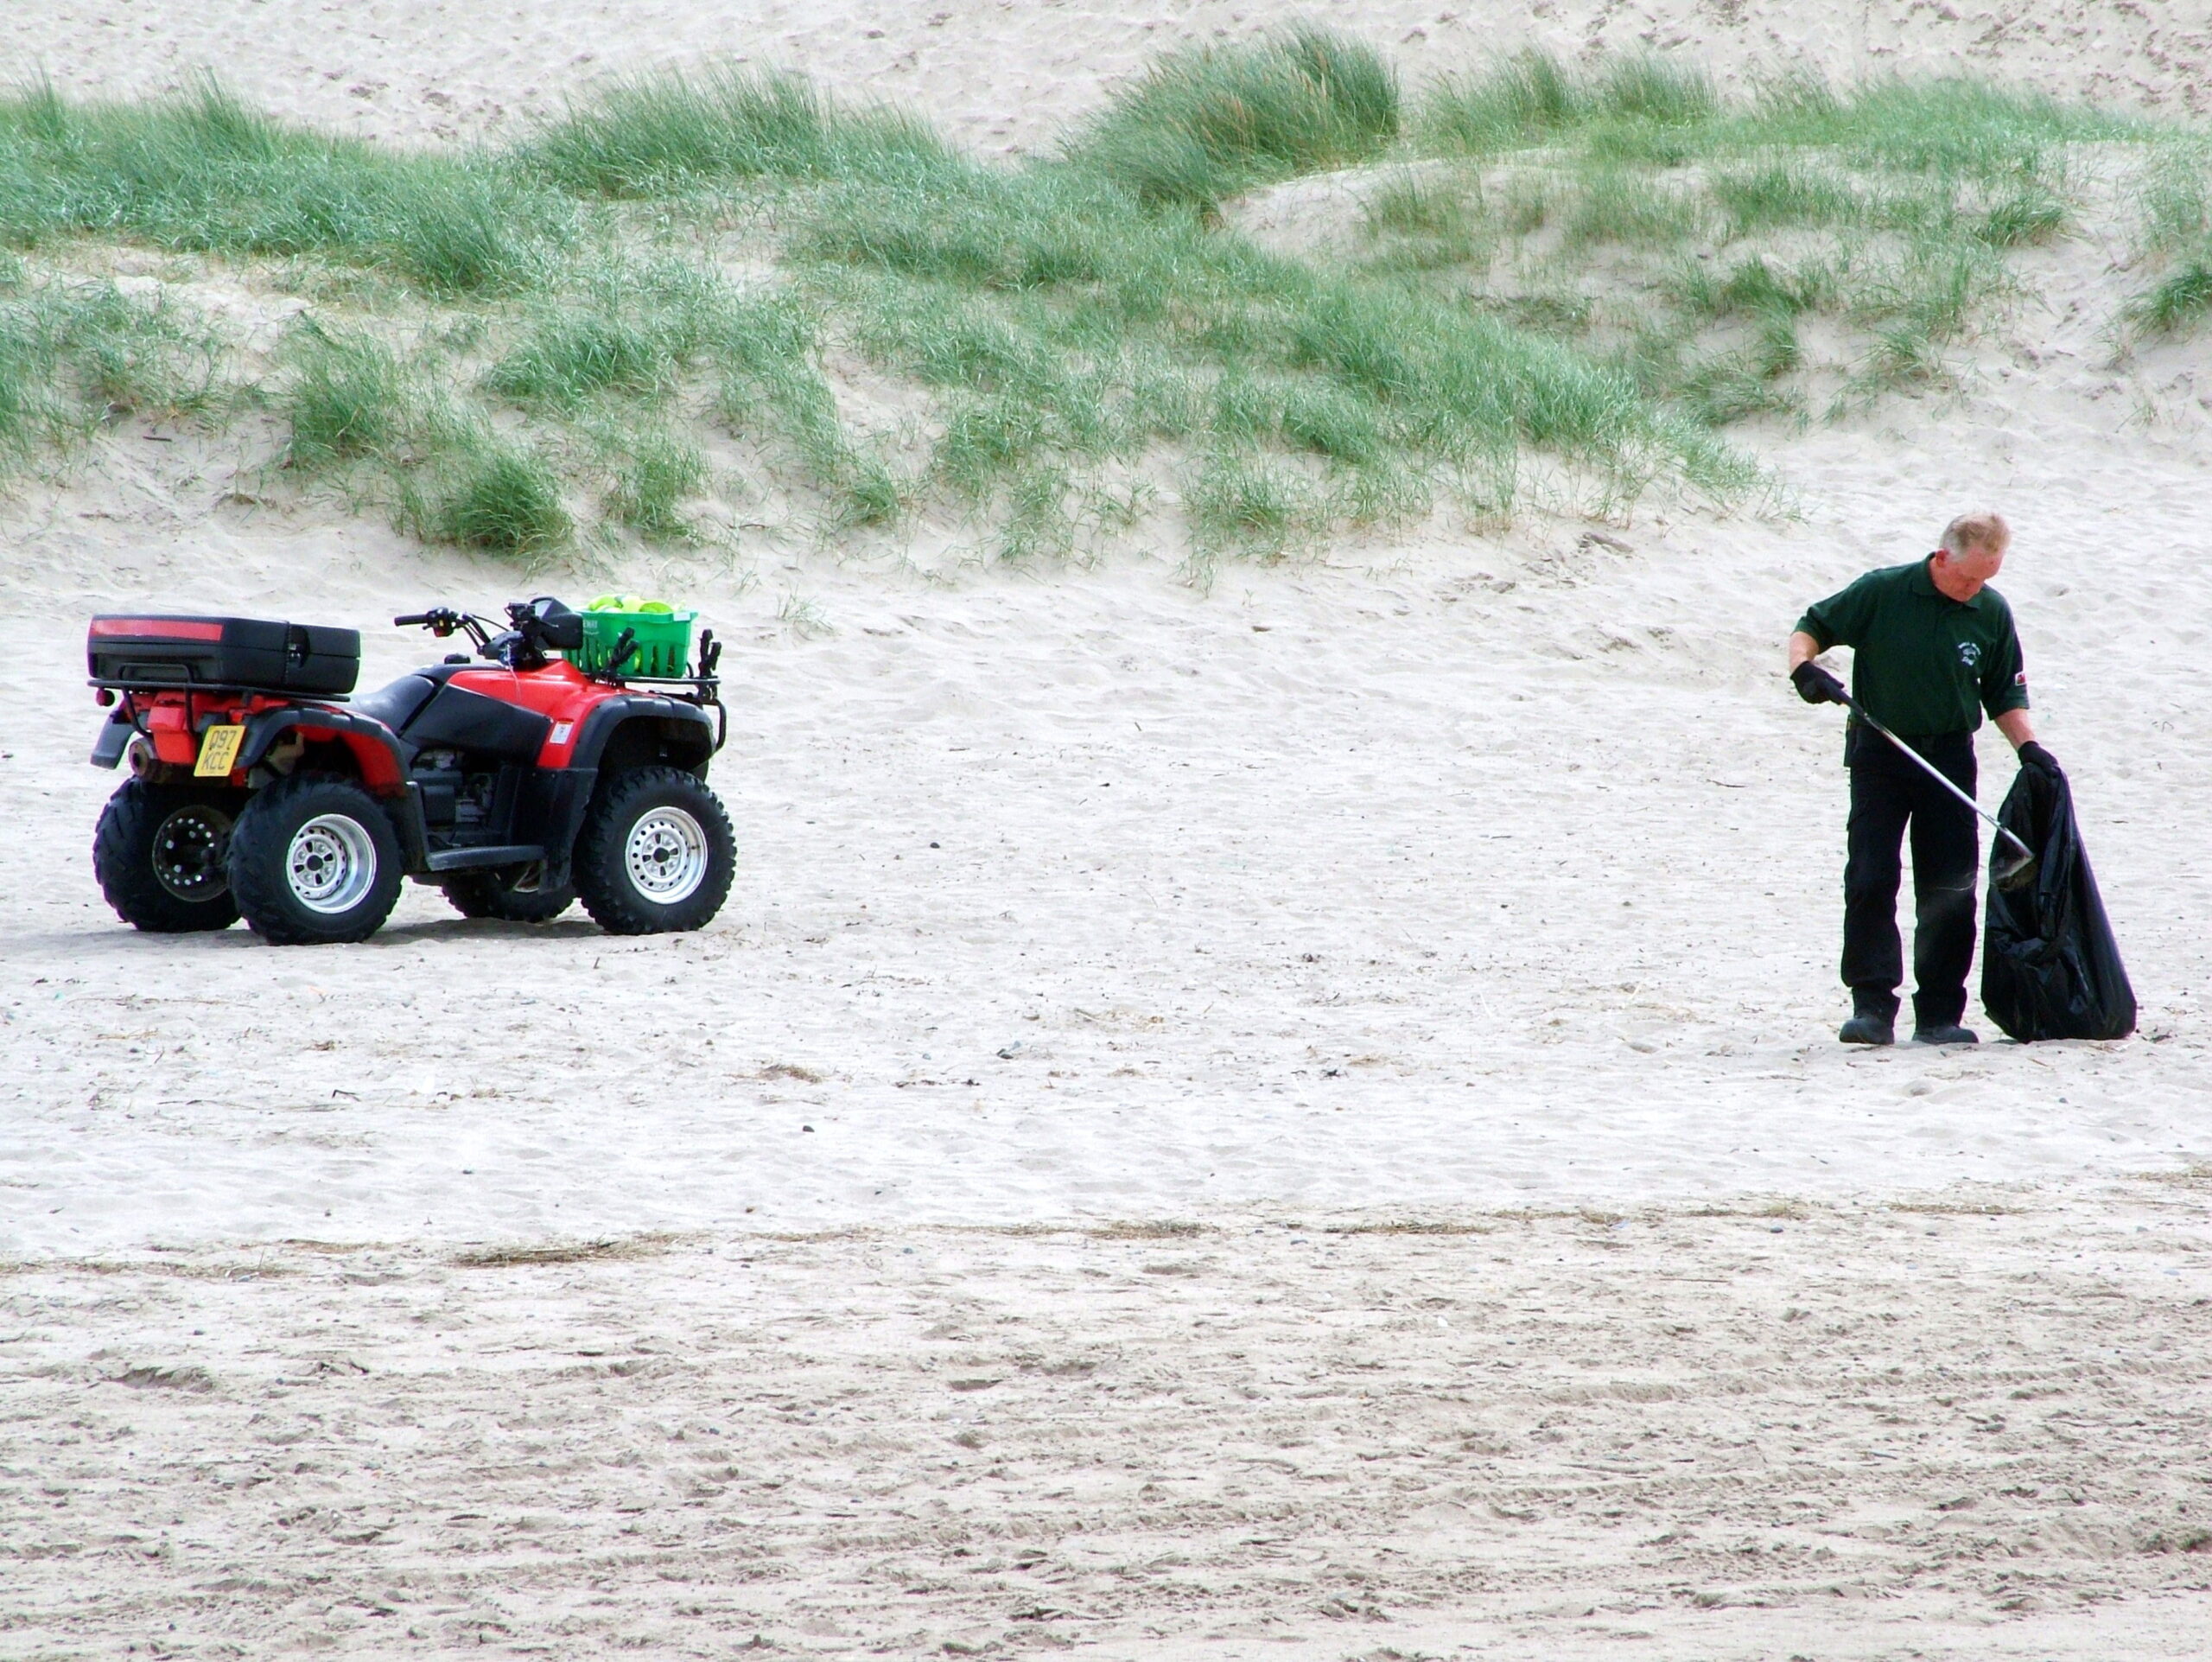 quadbike on beach with map picking litter